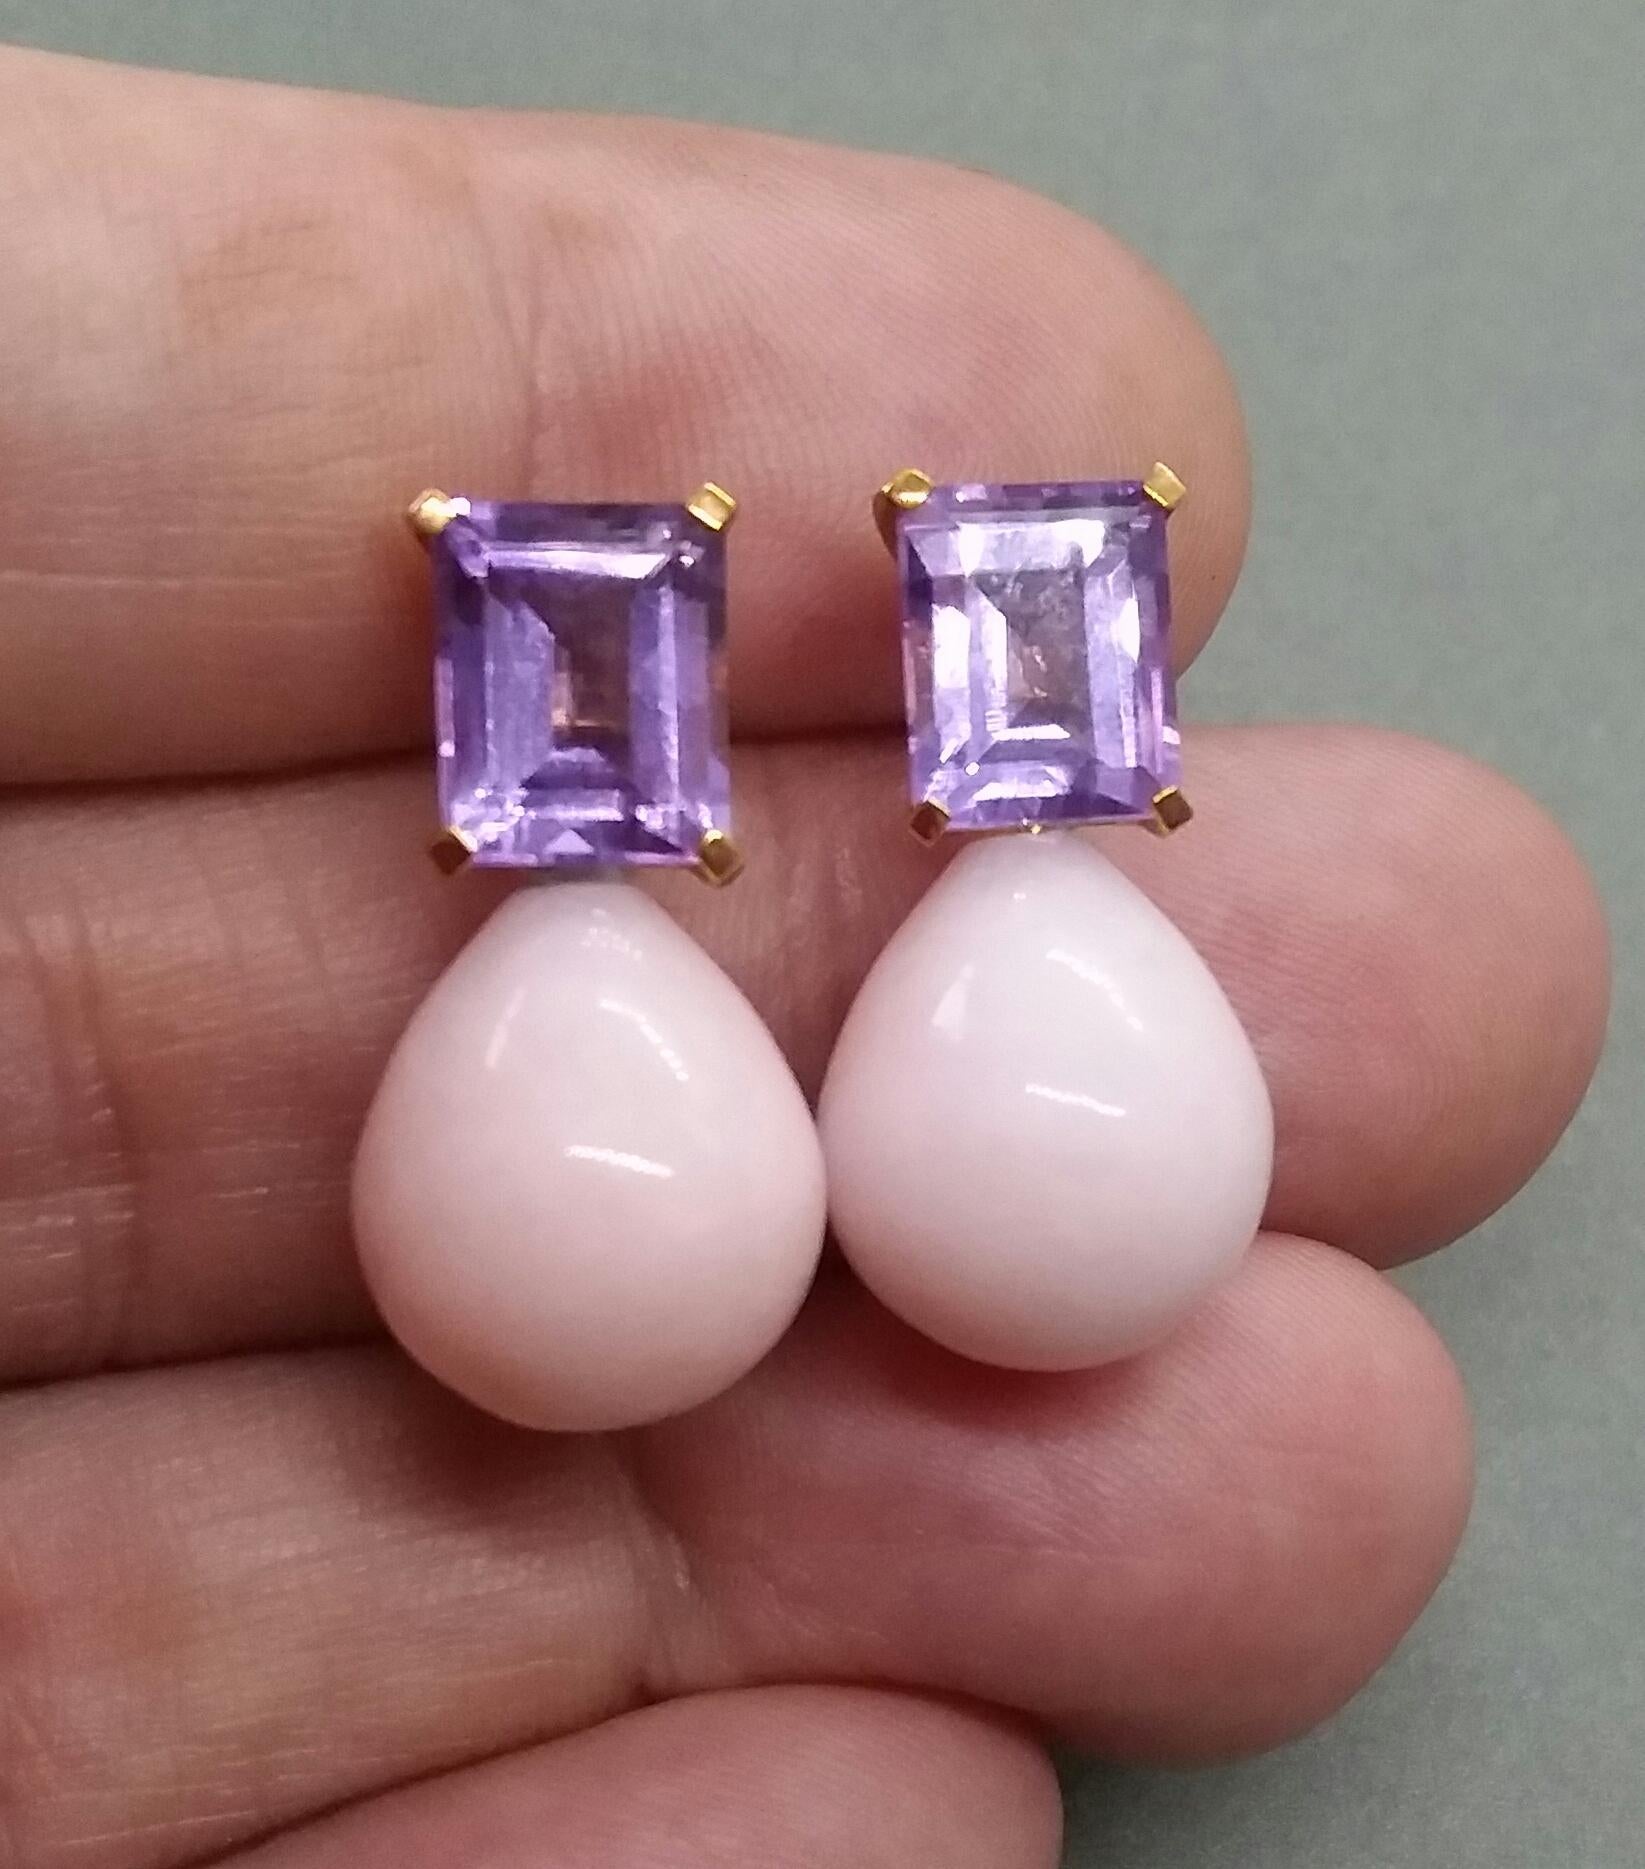 These simple but elegant earrings have 2 faceted rectangular shape Natural Amethysts set in yellow gold at the top to which are suspended 2 Pink Opal Plain Round Drops

In 1978 our workshop started in Italy to make simple-chic Art Deco style